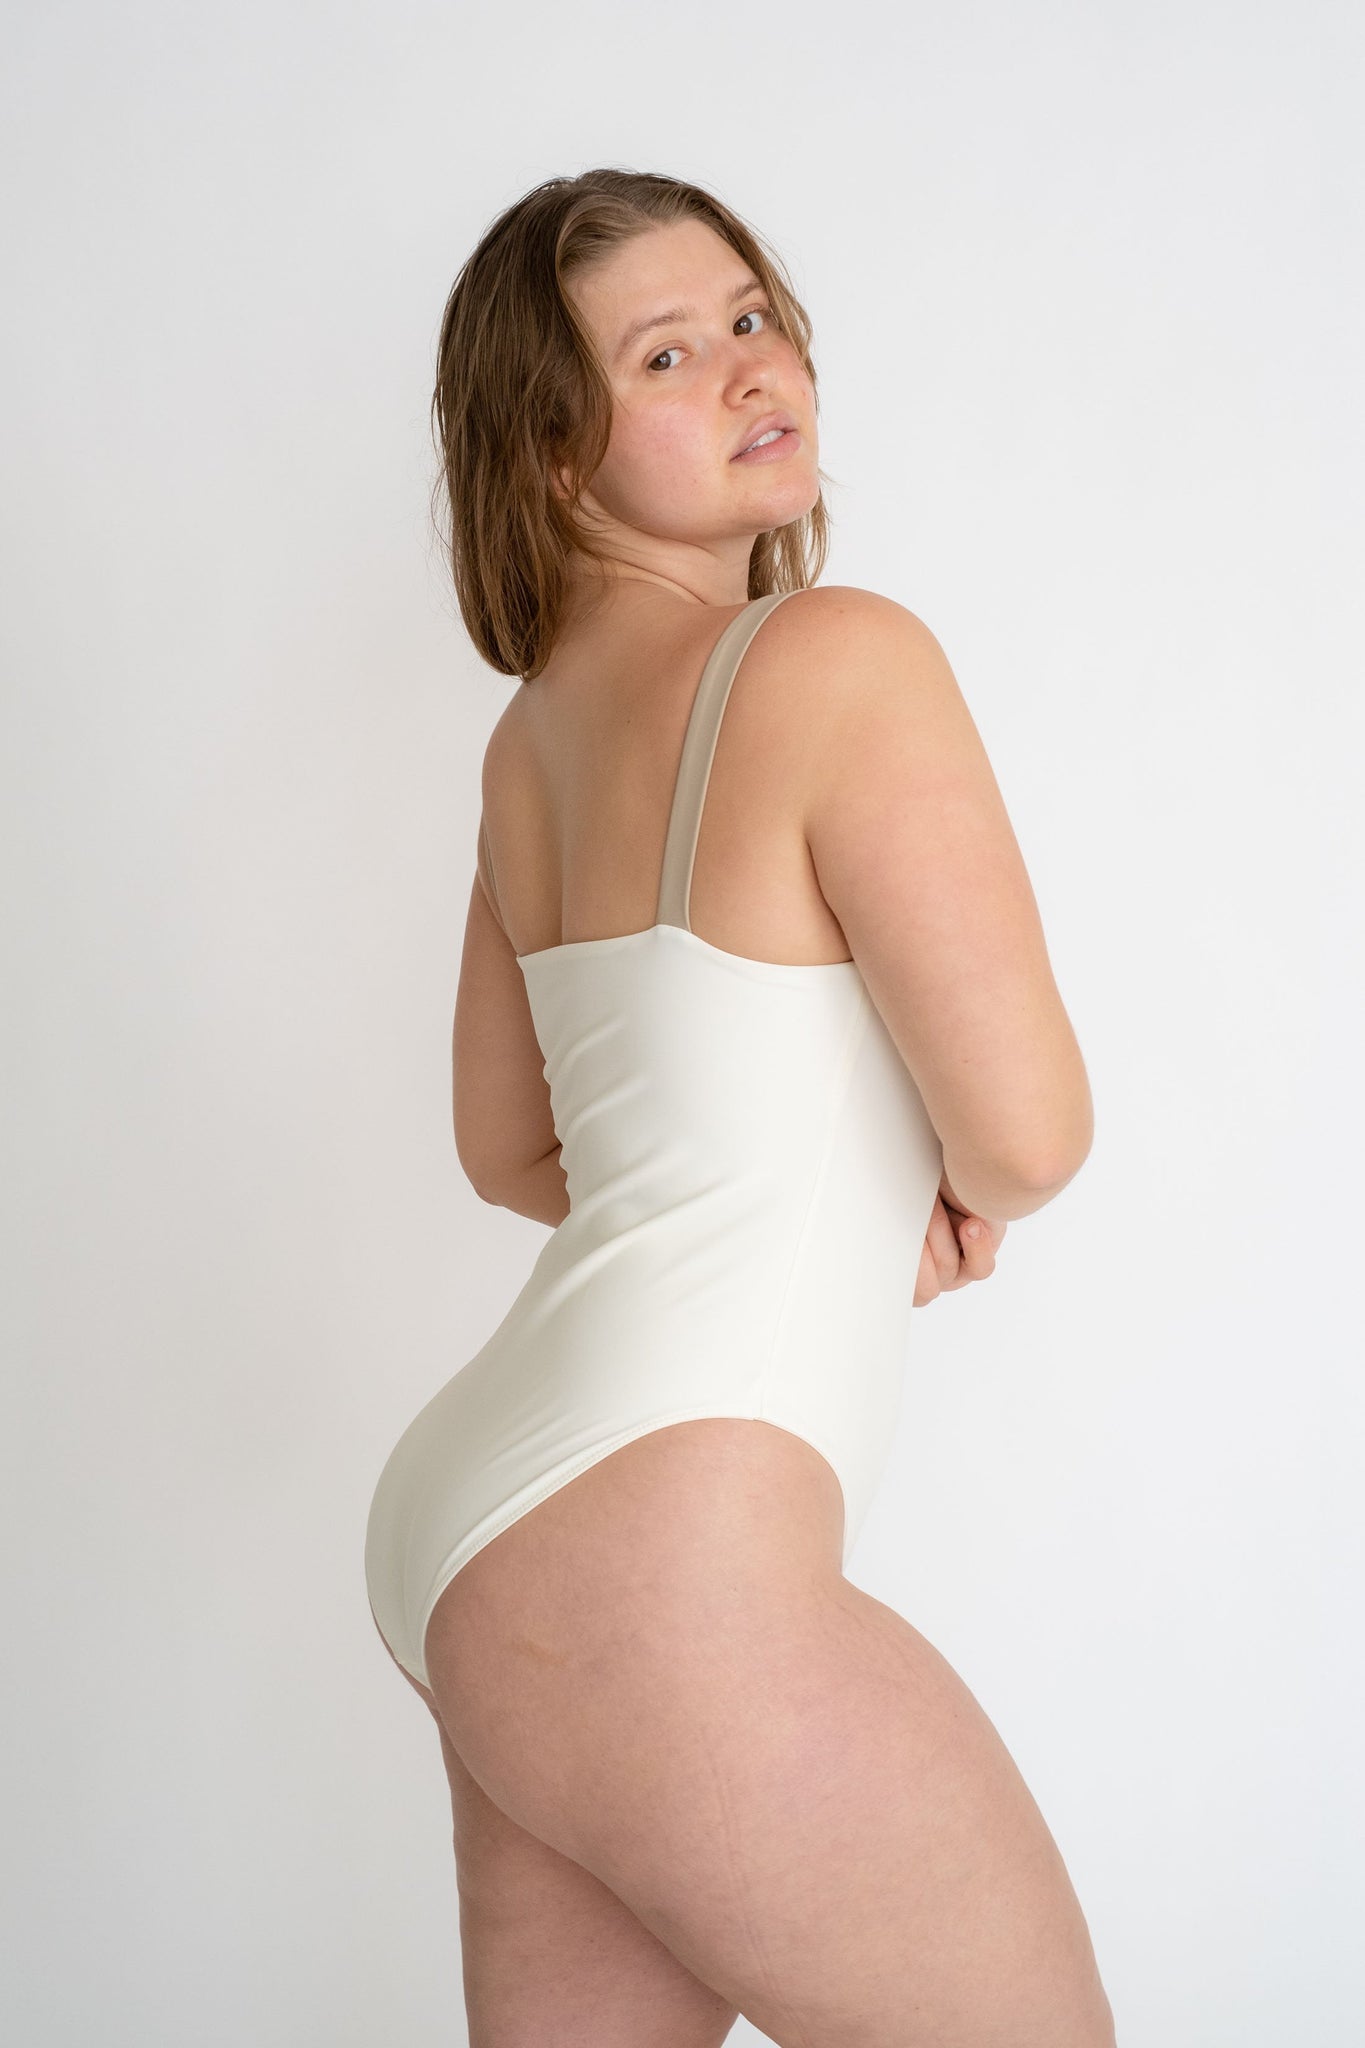 A woman standing to the side looking over her shoulder wearing a white one piece with thick nude spaghetti straps.